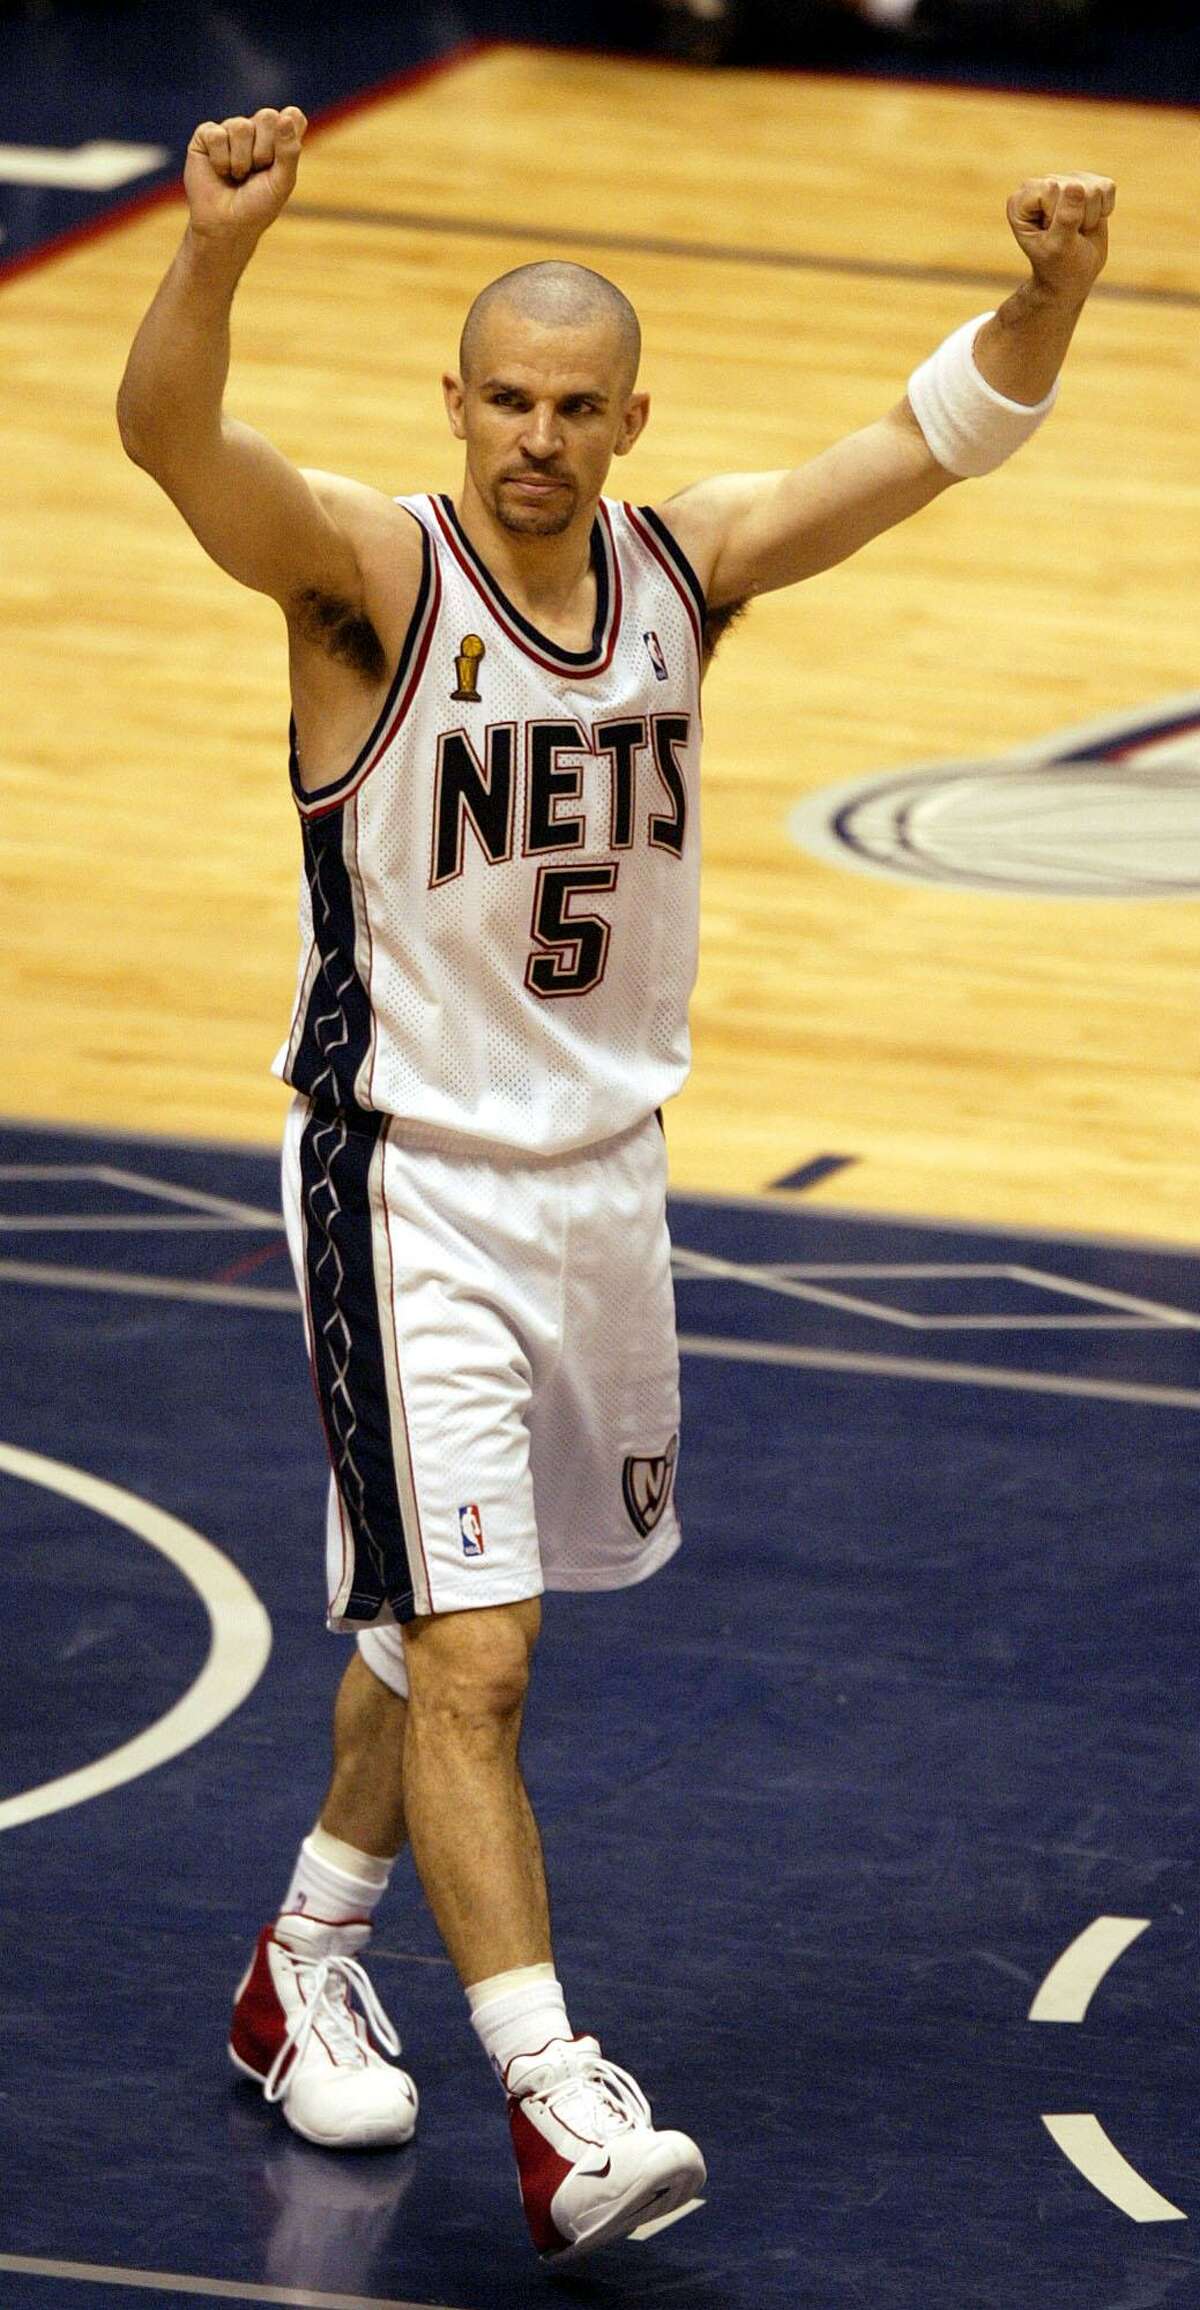 New Jersey Nets' Jason Kidd celebrates the Nets 77-76 win over the San Antonio Spurs' during Game 4 of the NBA Finals Wednesday, June 11, 2003 in East Rutherford, NJ. (AP Photo/Miles Kennedy)